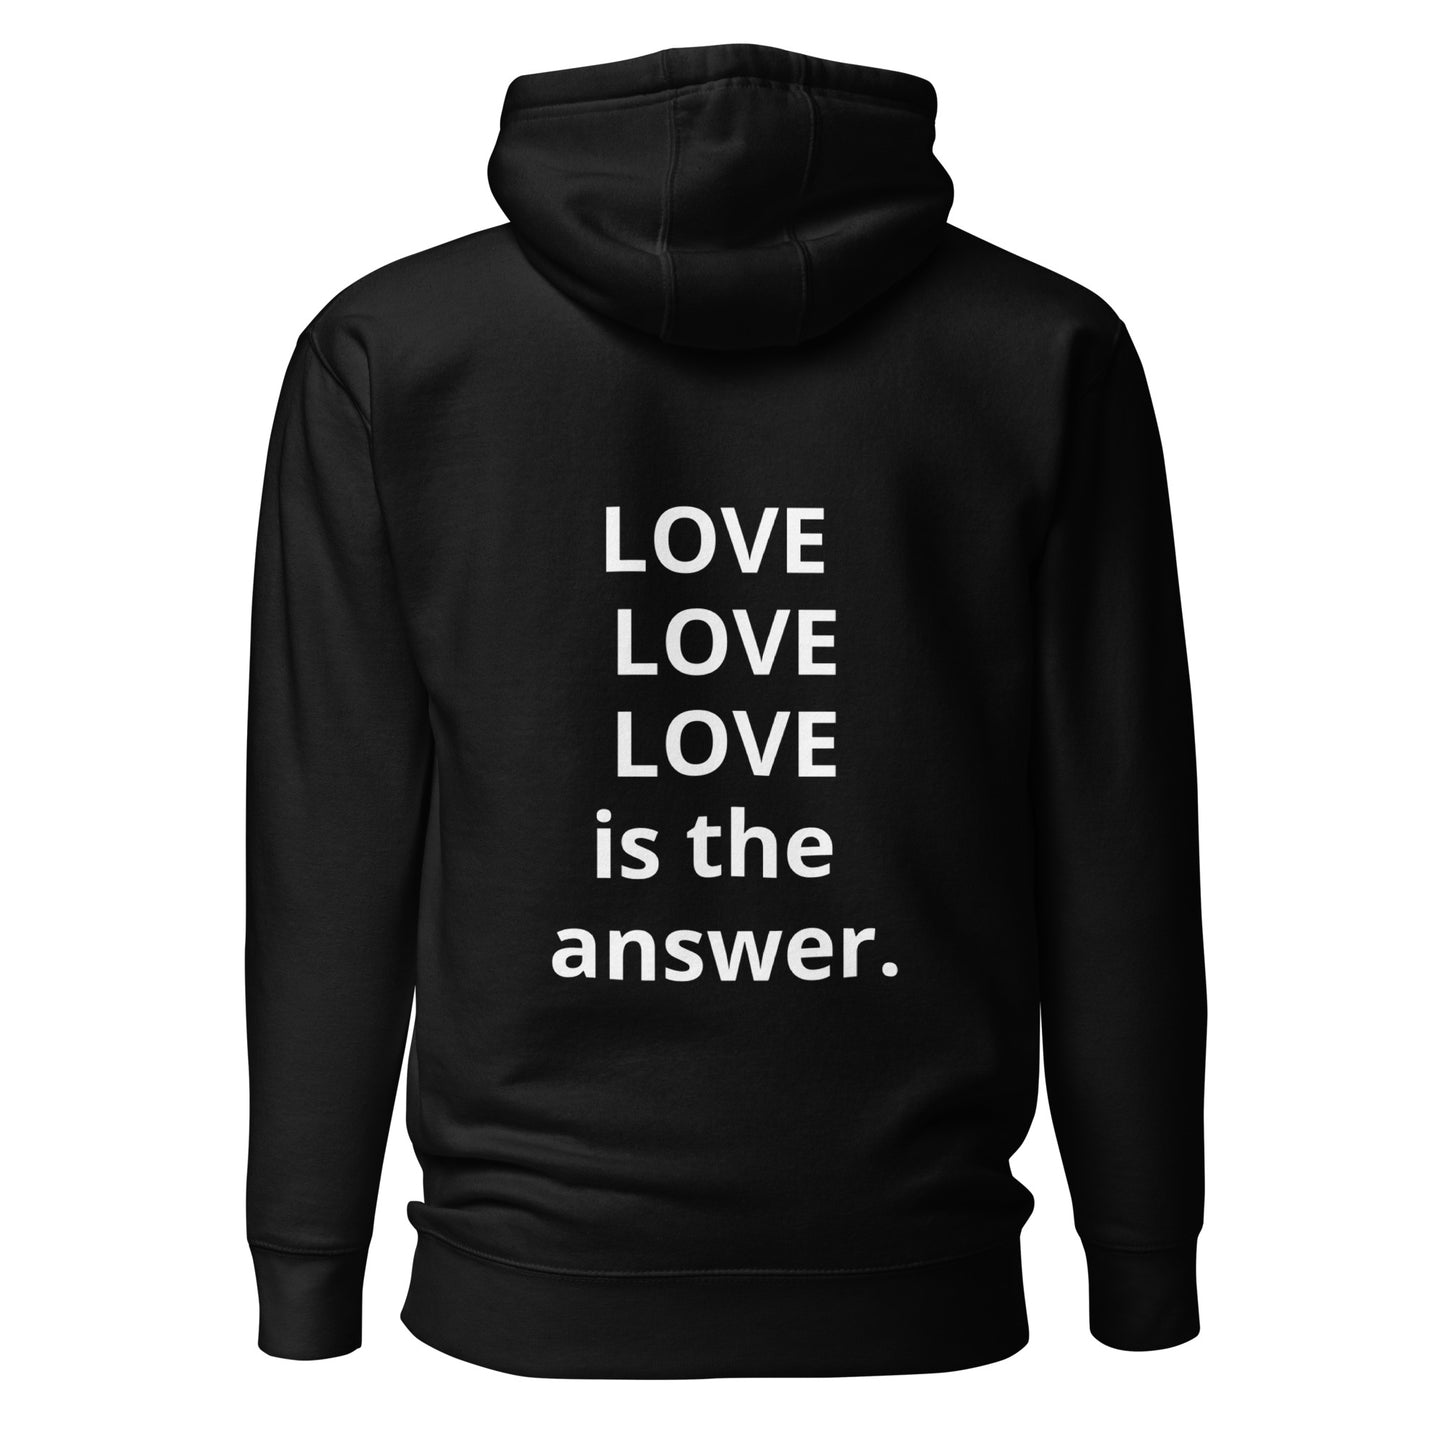 LOVE IS THE ANSWER! Our bestselling hoodie is not only a work of art but ALL PROCEEDS go to our favorite charity MEALS BY GRACE. Grab one for you and a friend :)